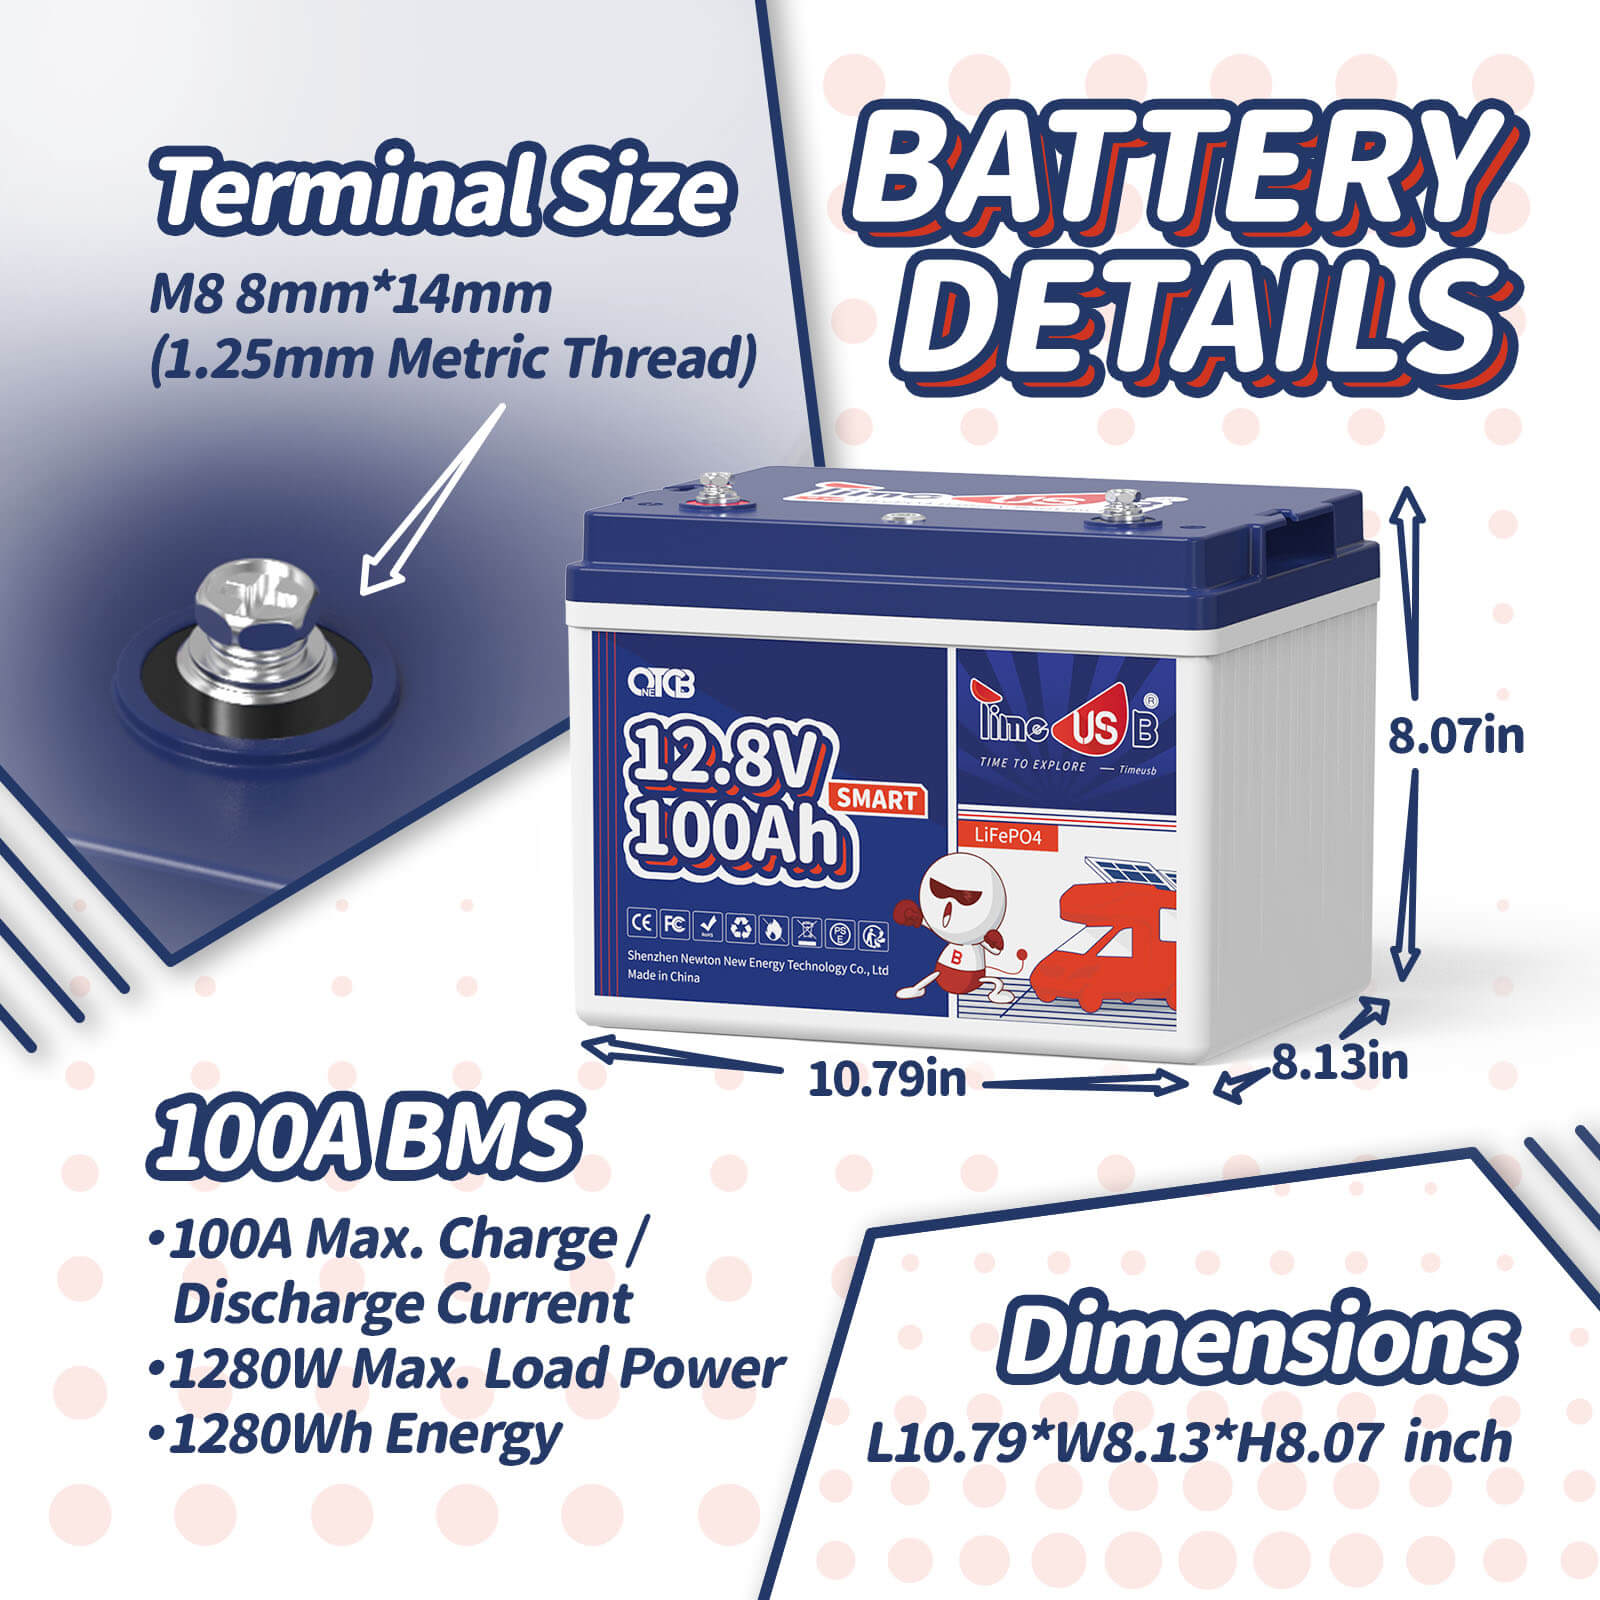 Timeusb 12V 100Ah Smart LiFePO4 Battery | 1.28kWh & 1.28kW | 100A BMS